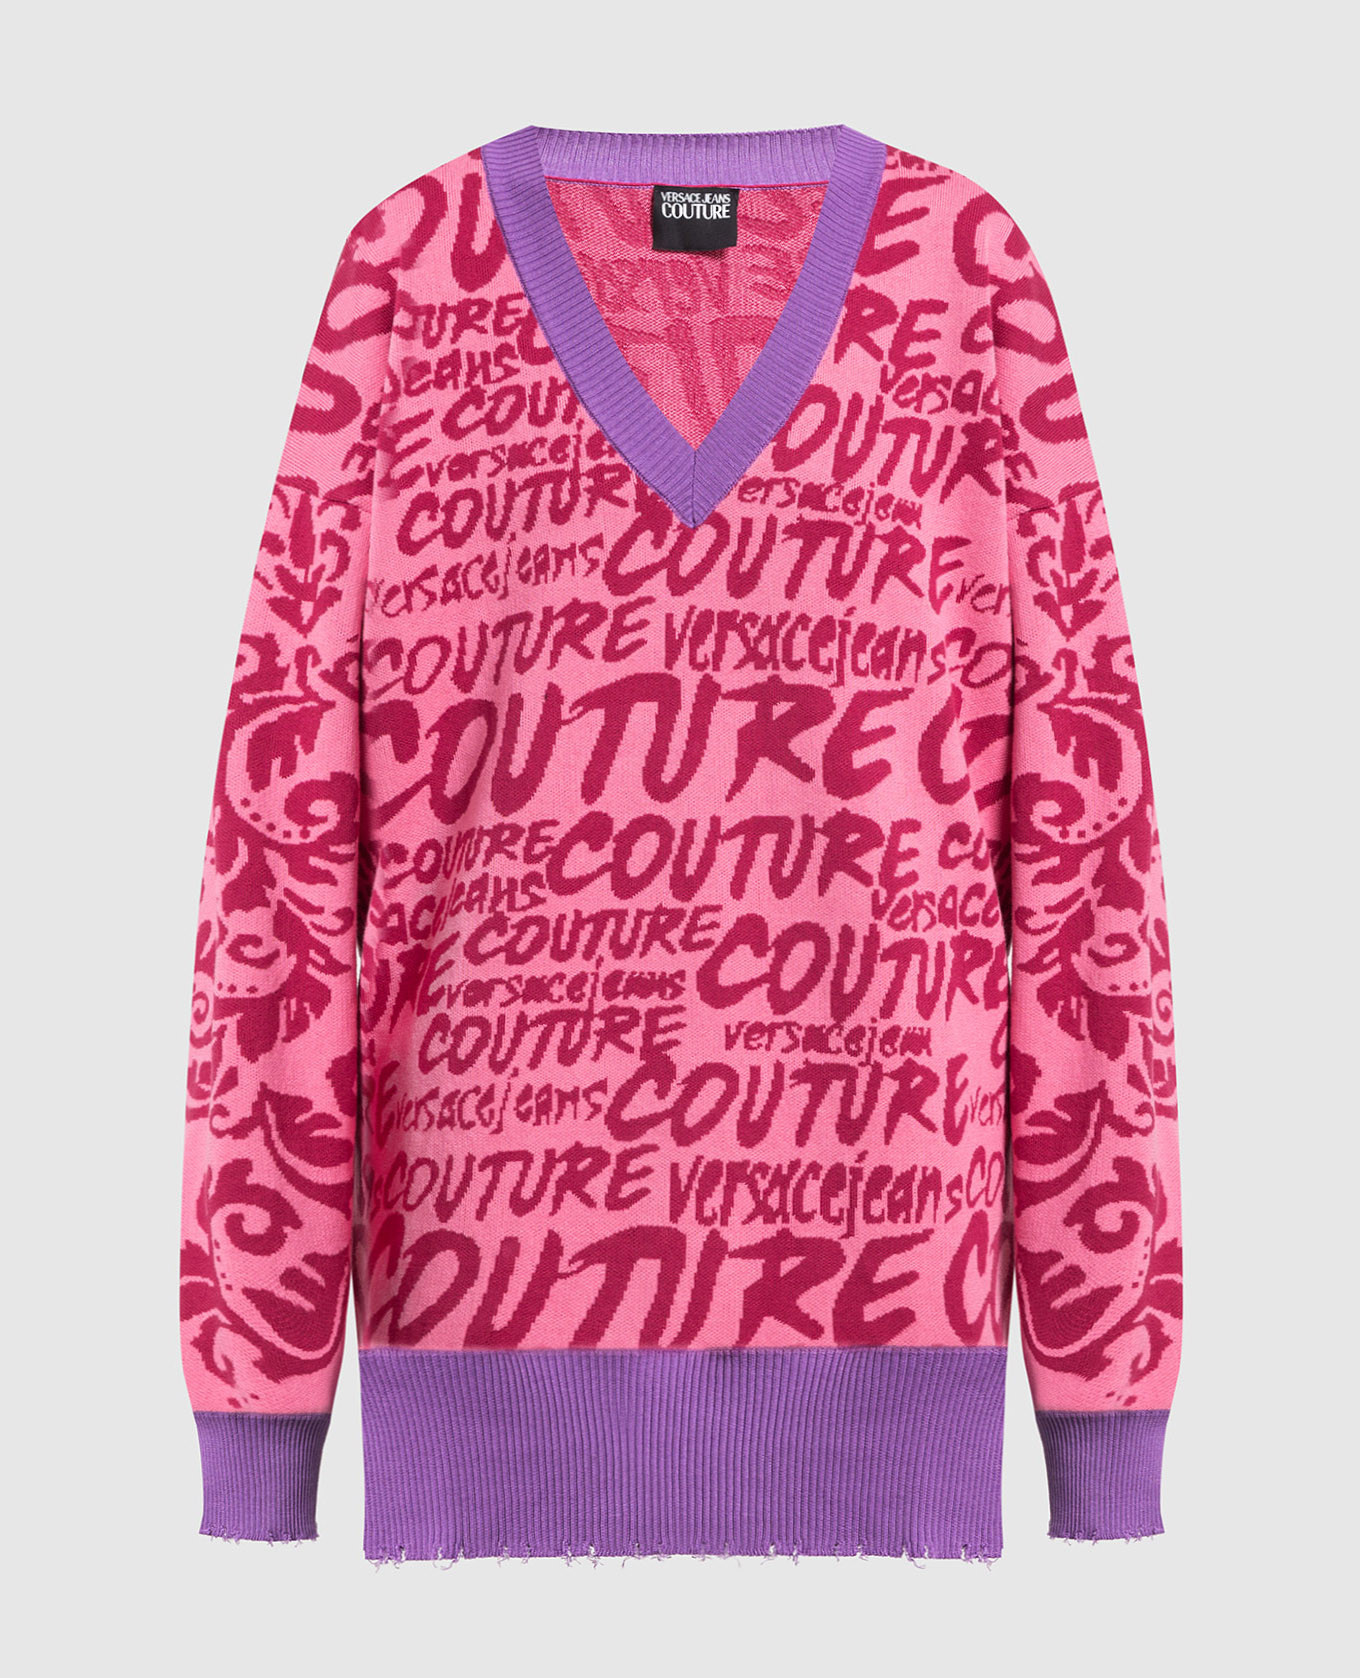 Pink pullover in jacquard pattern LOGO BRUSH COUTURE